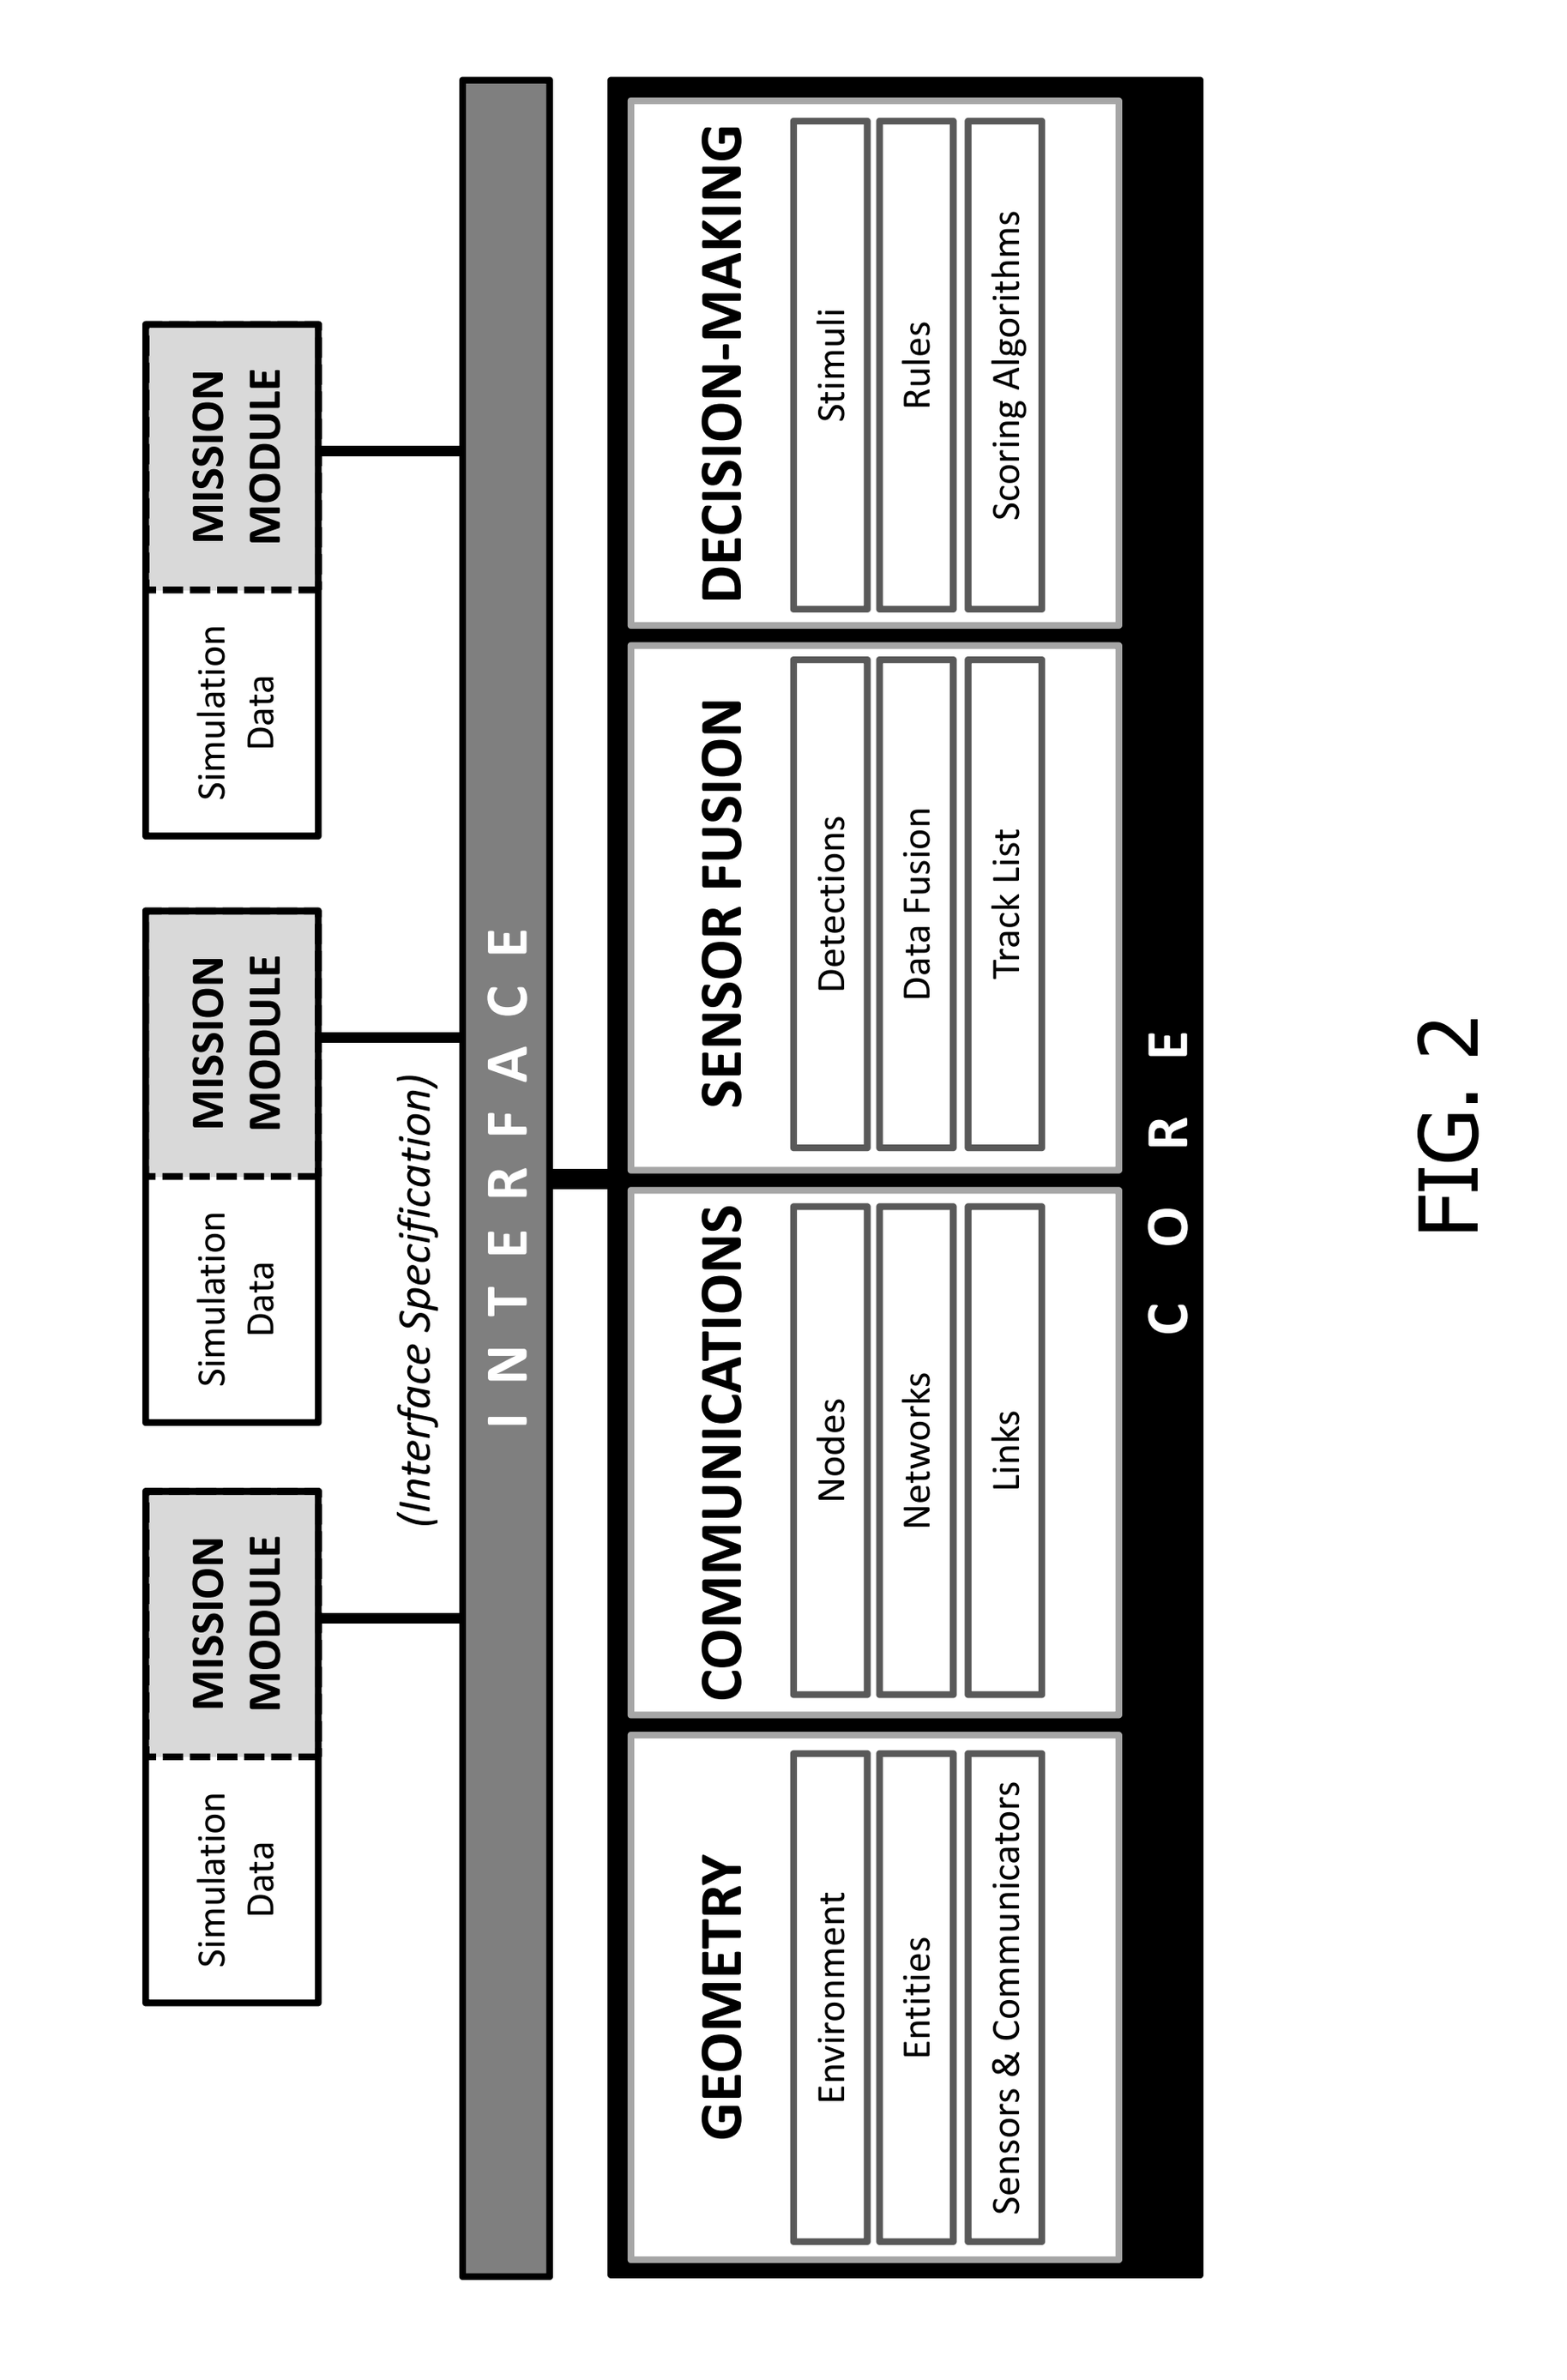 Core-modular interoperability architecture for modeling and simulation